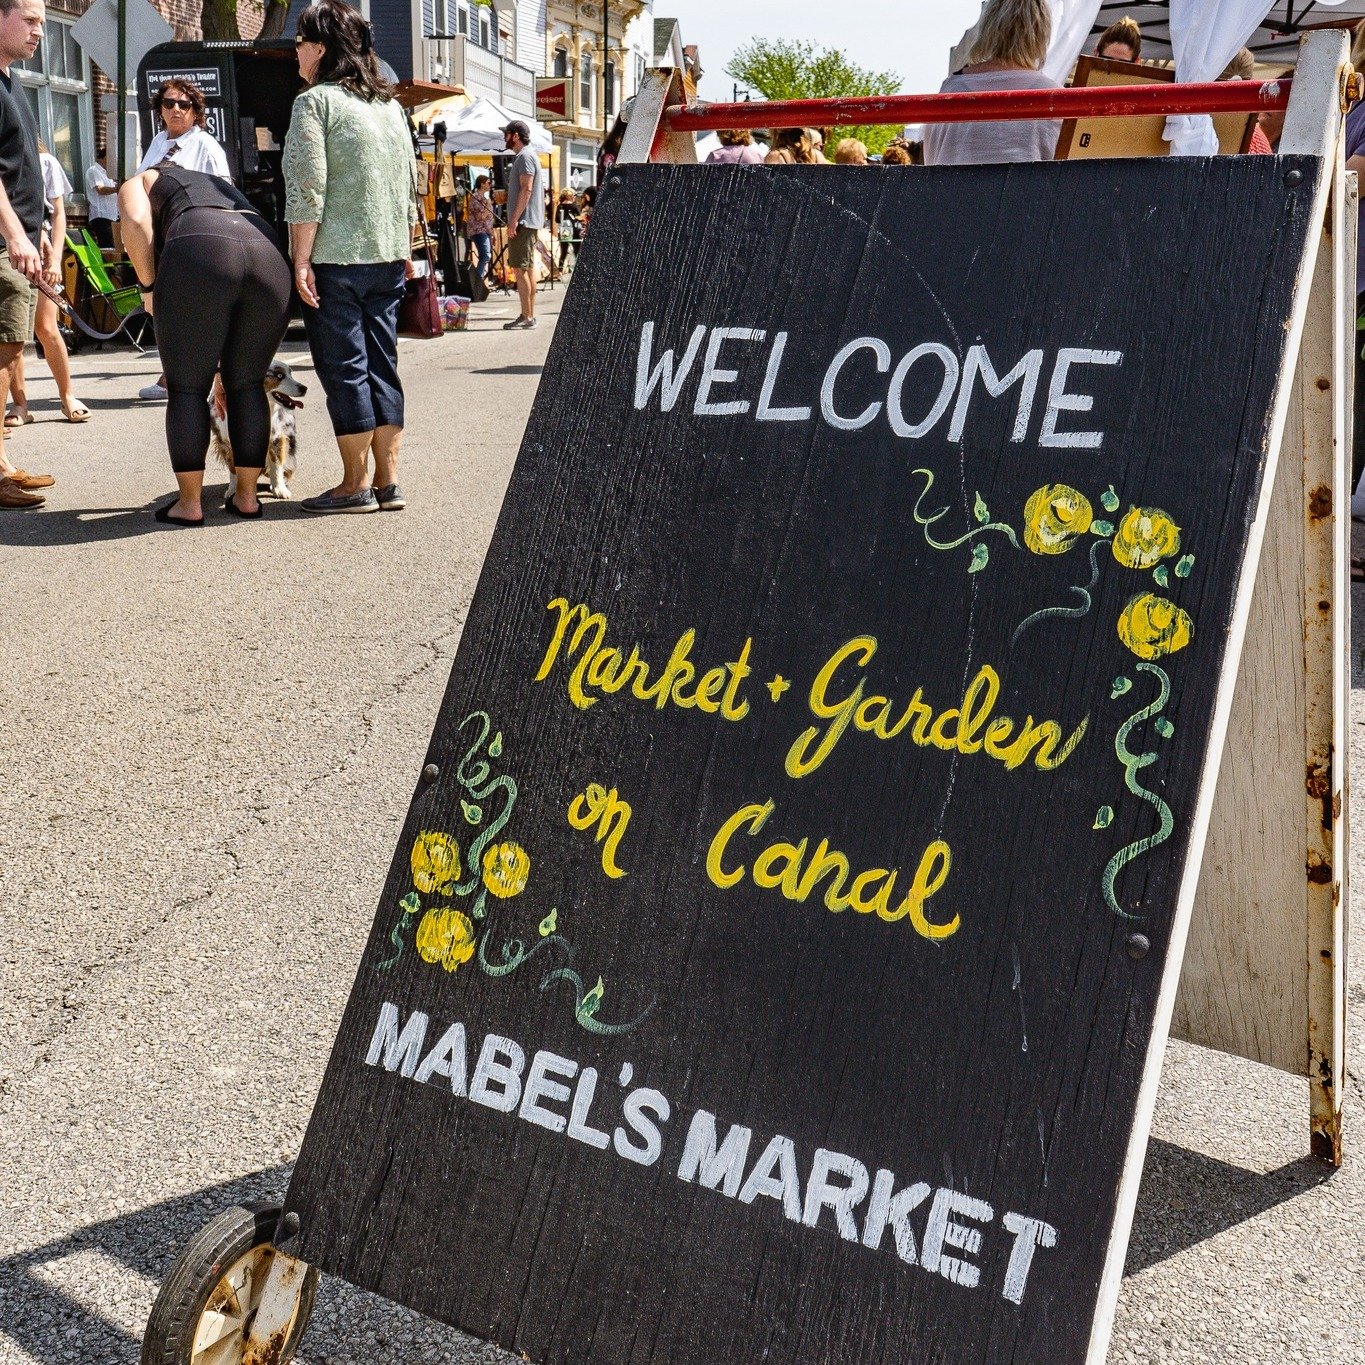 Make your way to Lemont Downtown on Sunday, May 5 from 9AM - 3PM for Market on Canal hosted by @mabelsmarket! The curated shopping experience trucks full of vintage fair, handcrafted goods, and meet with local artisans. Enjoy live music, food, and a 